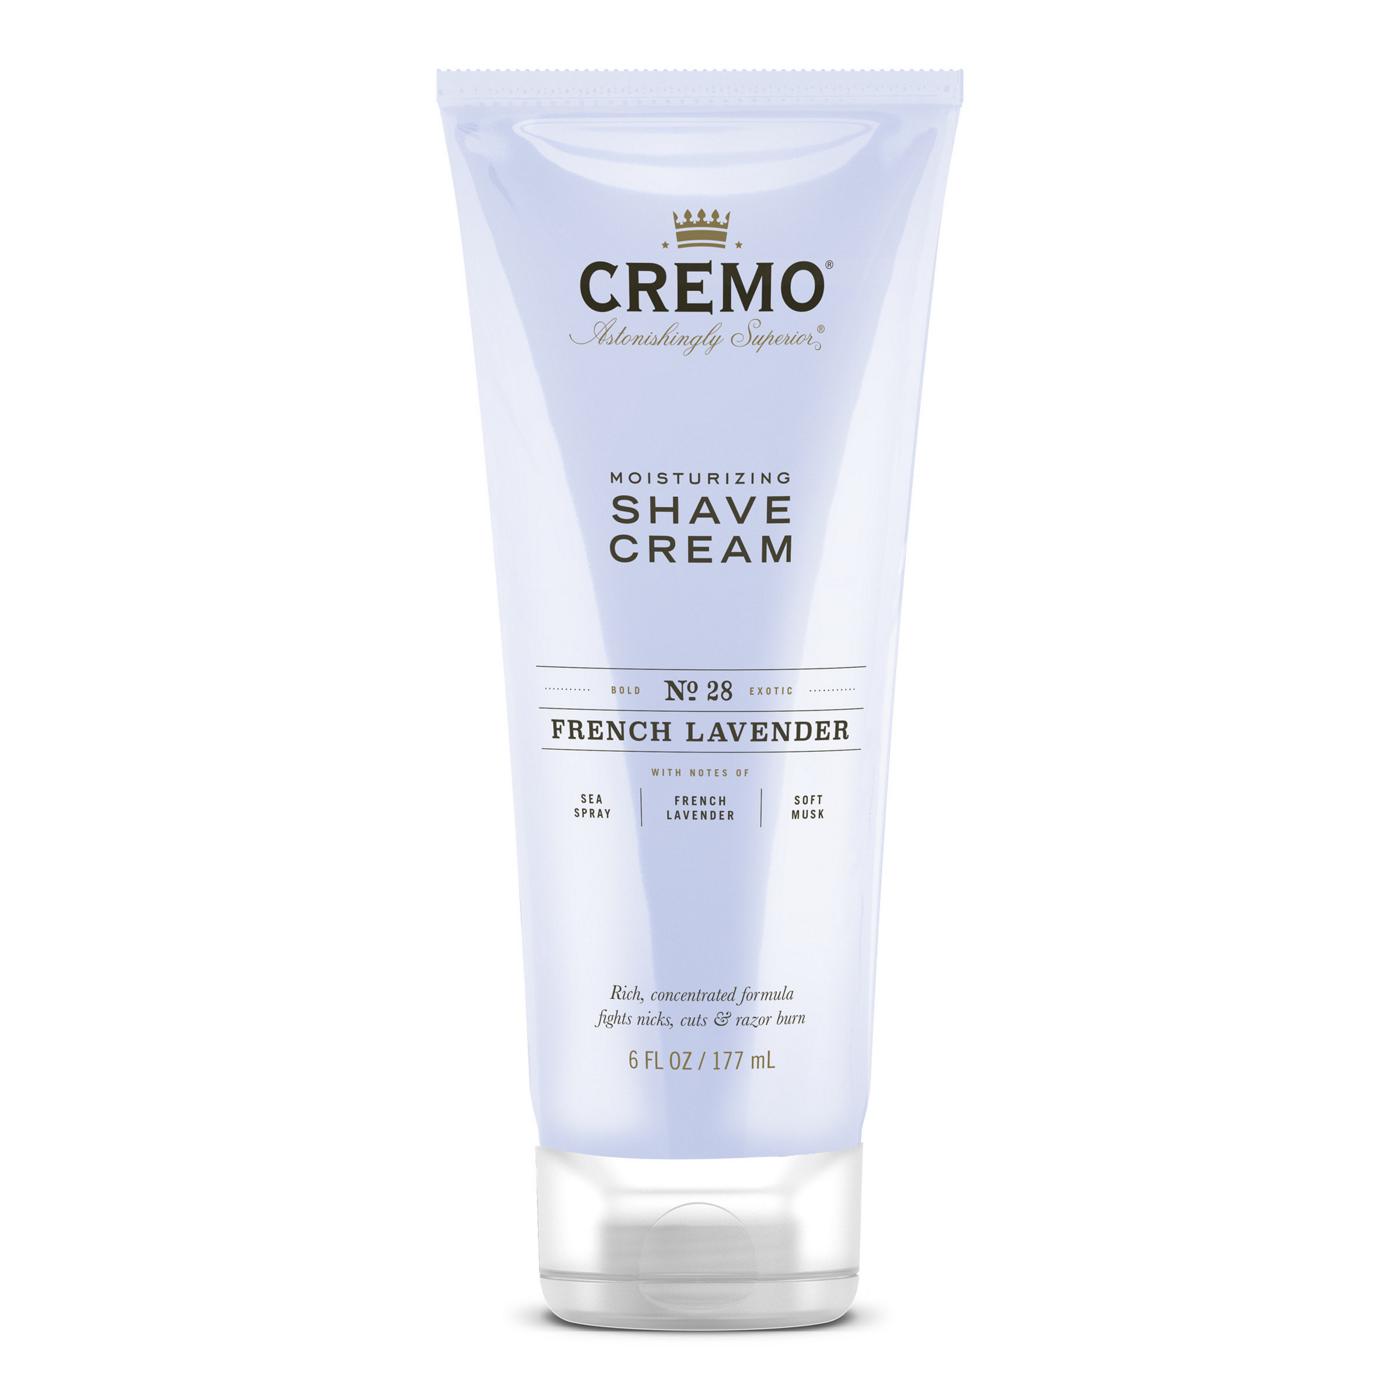 Cremo Shave Cream - French Lavender; image 1 of 7